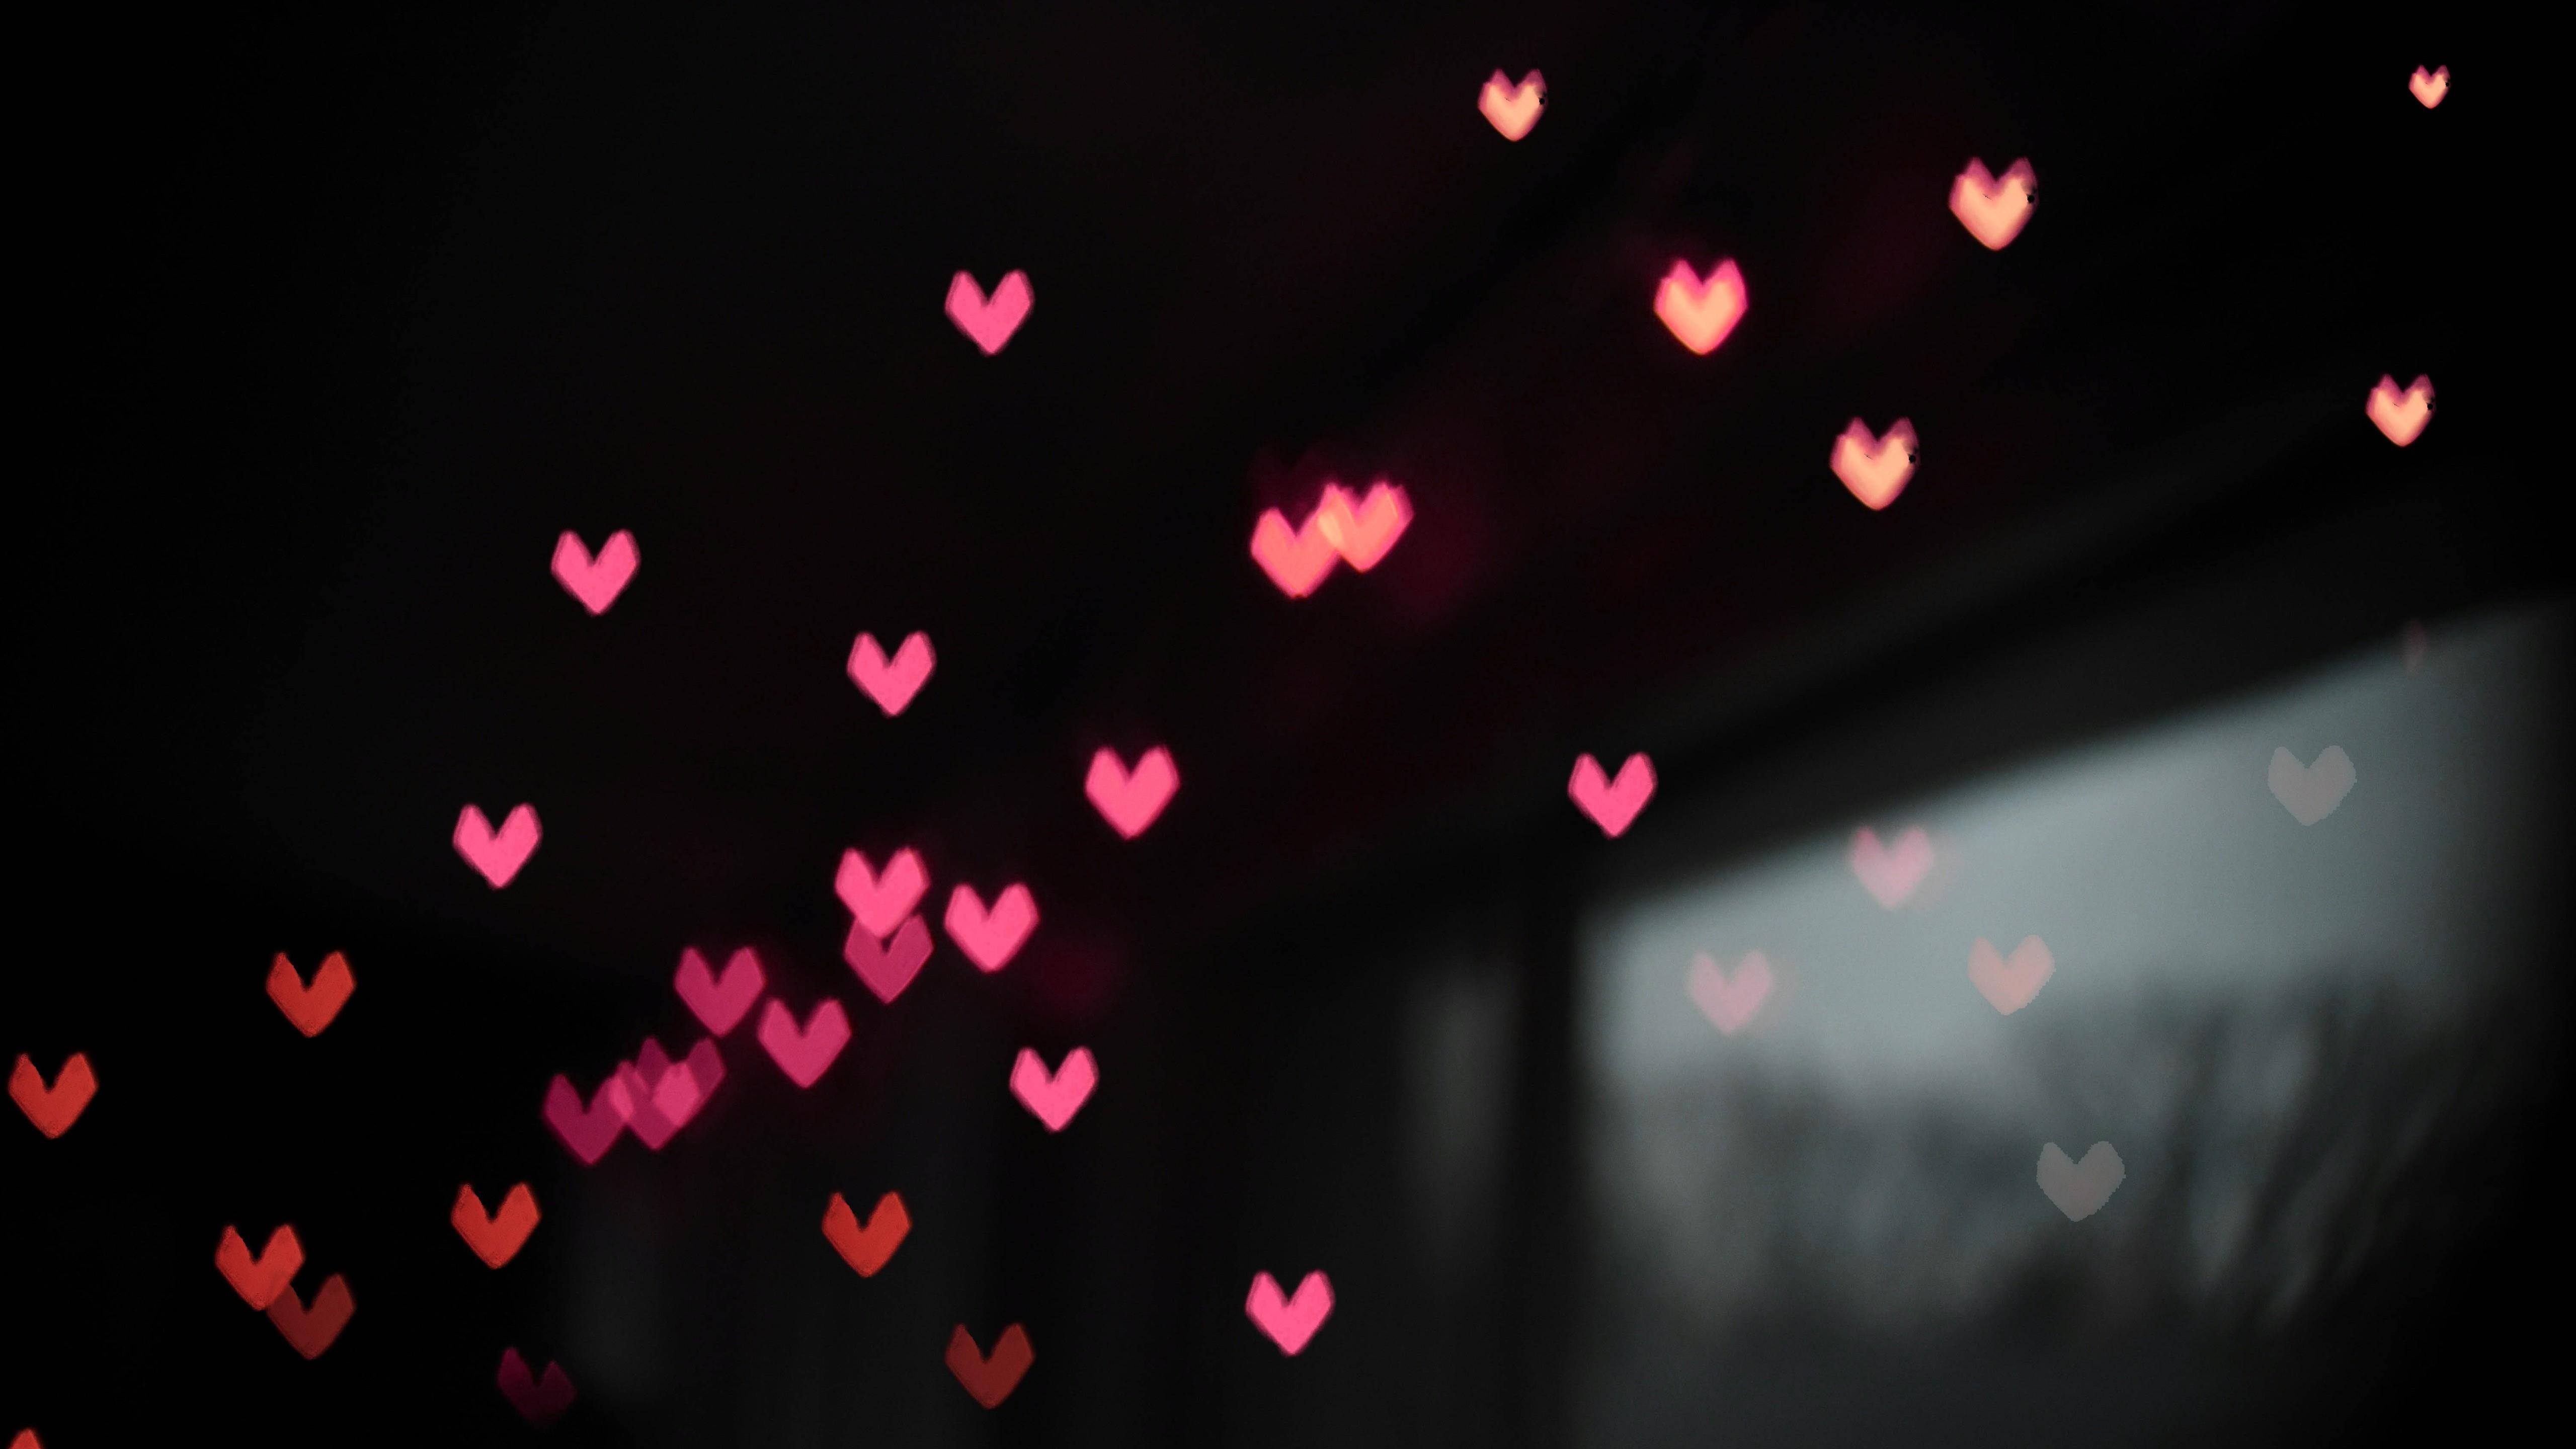 Small Pink Heart in Black Background 5K Abstract Wallpaper. HD